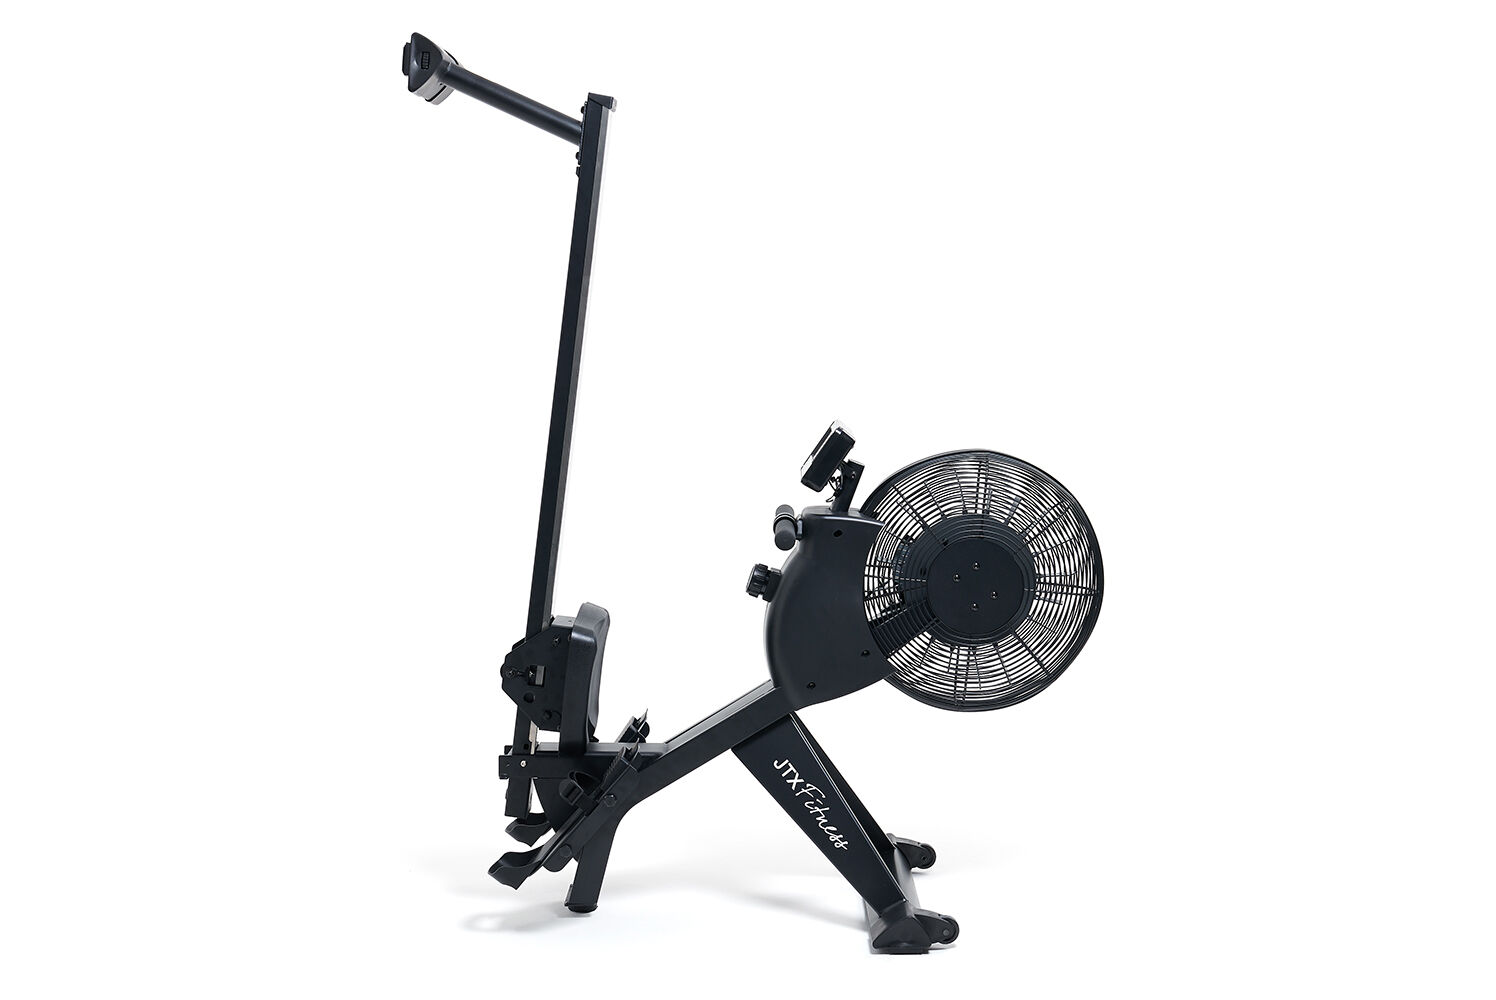 Folding Rowing Machine For Home Use - JTX Freedom Air